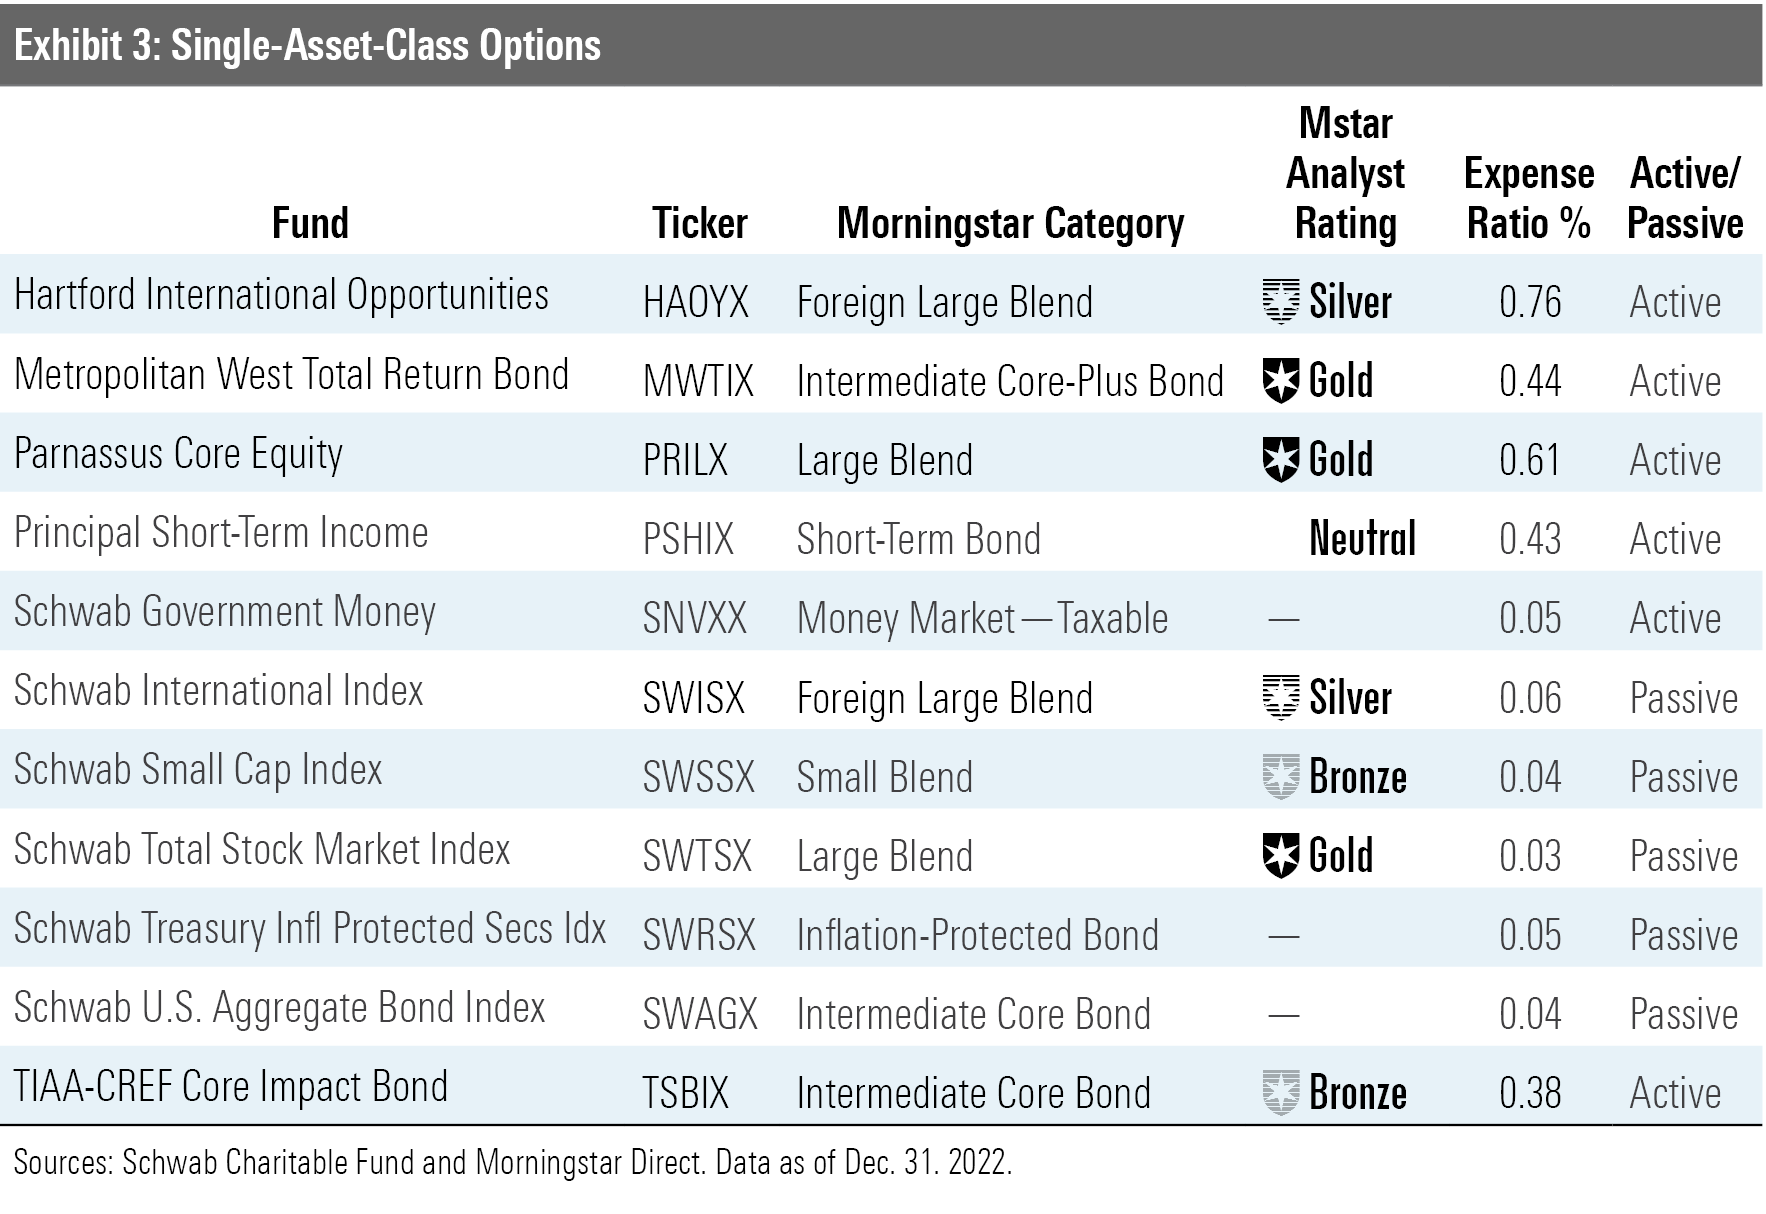 A table showing the single asset-class investment options available in the Schwab Charitable Fund.